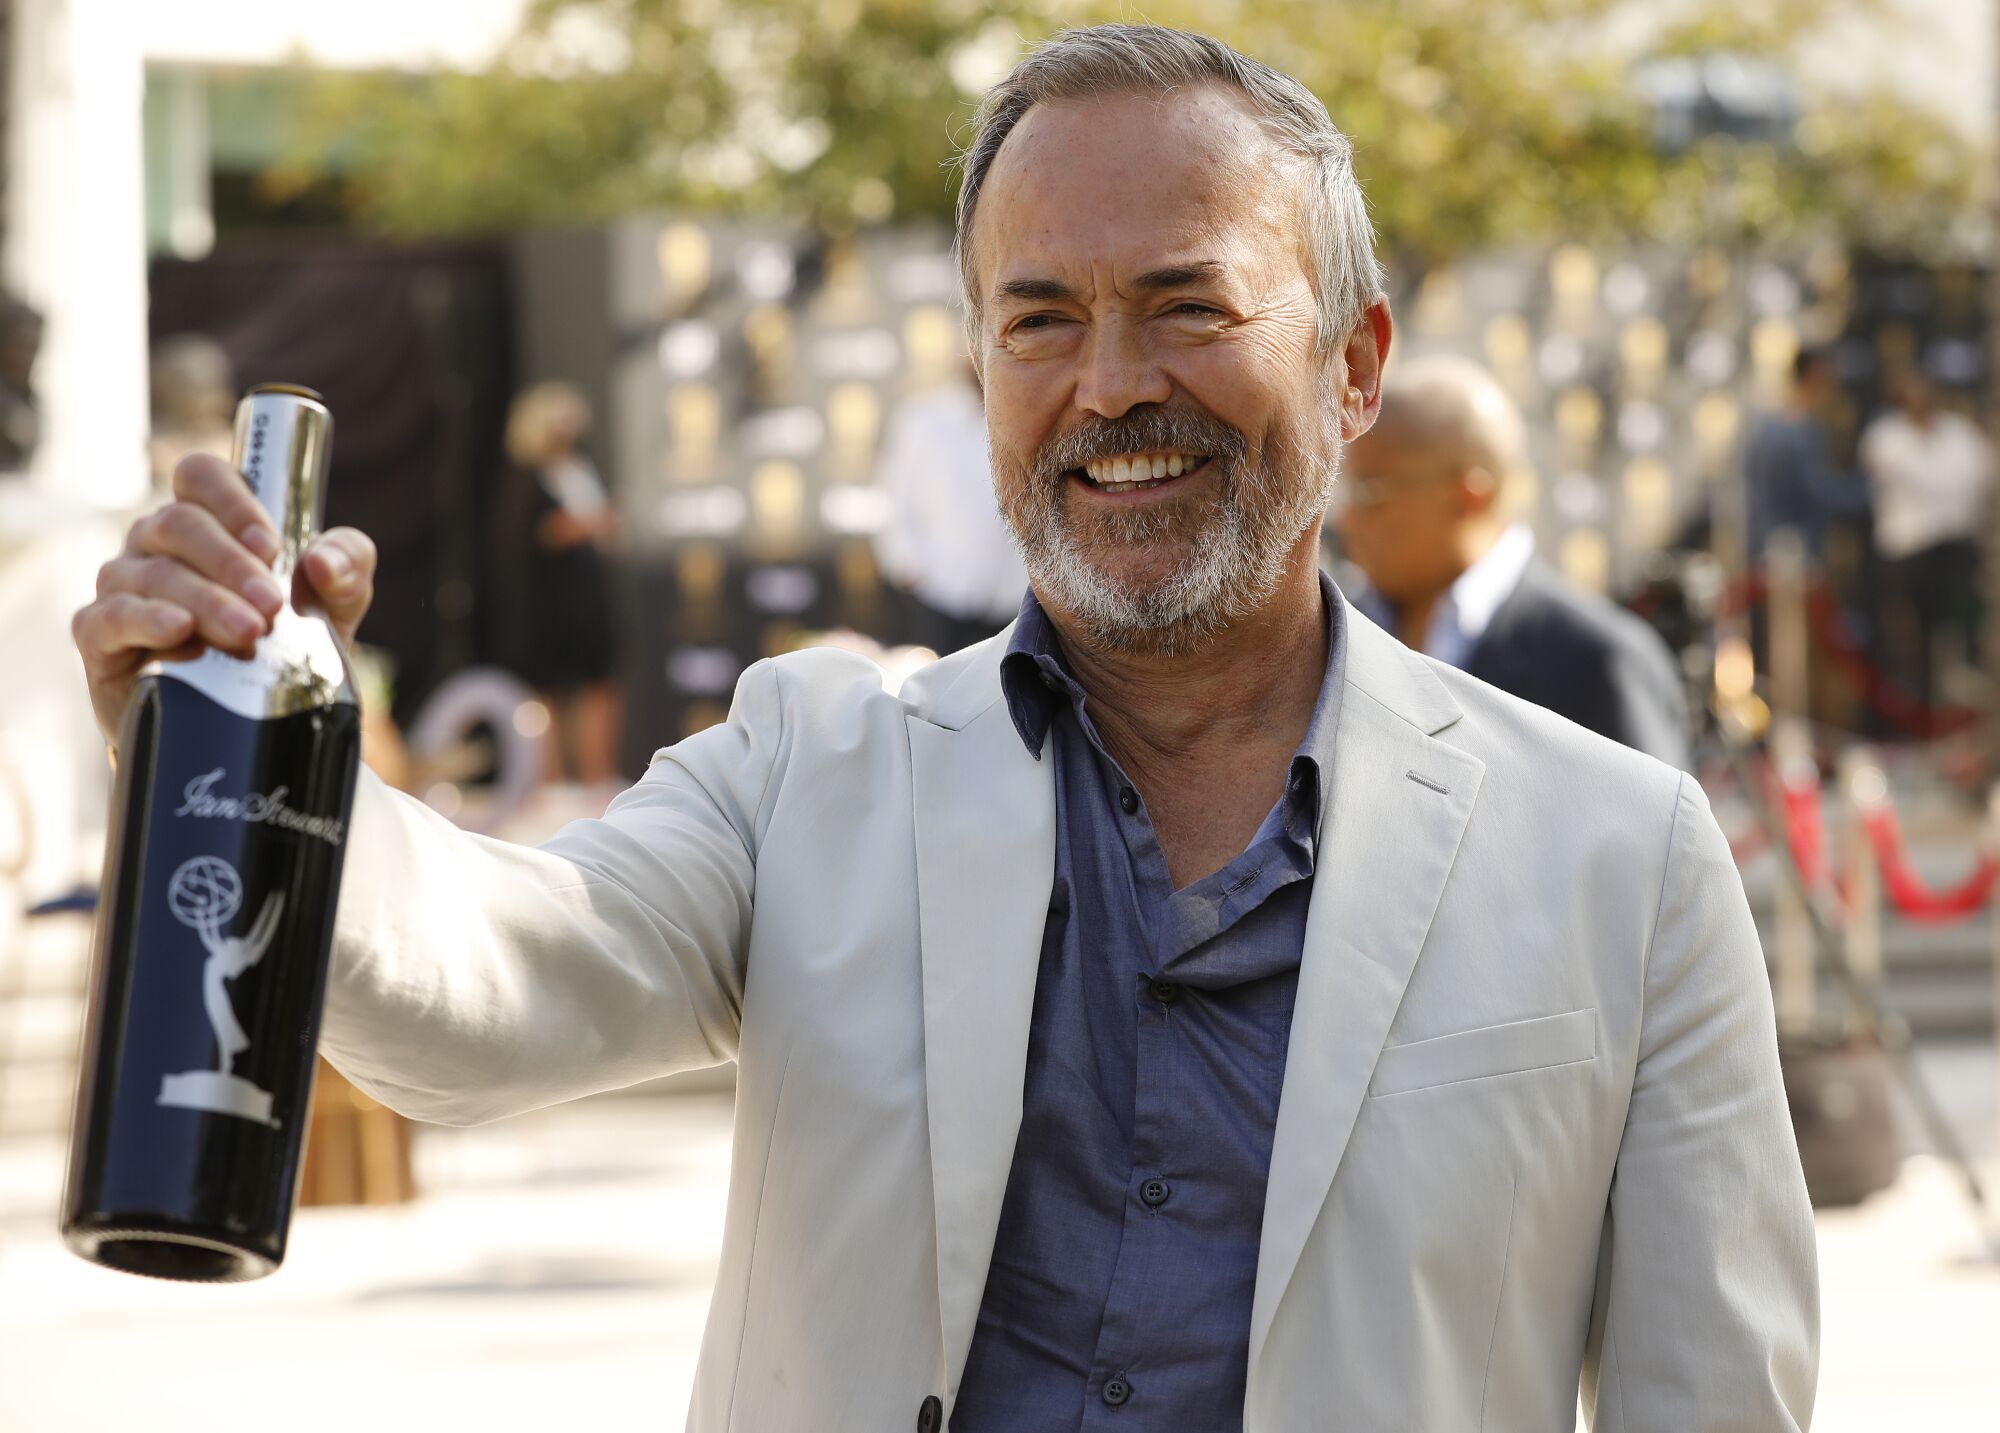 73rd Emmy Awards executive producer Ian Stewart holds a bottle of Sterling Vineyards wine.